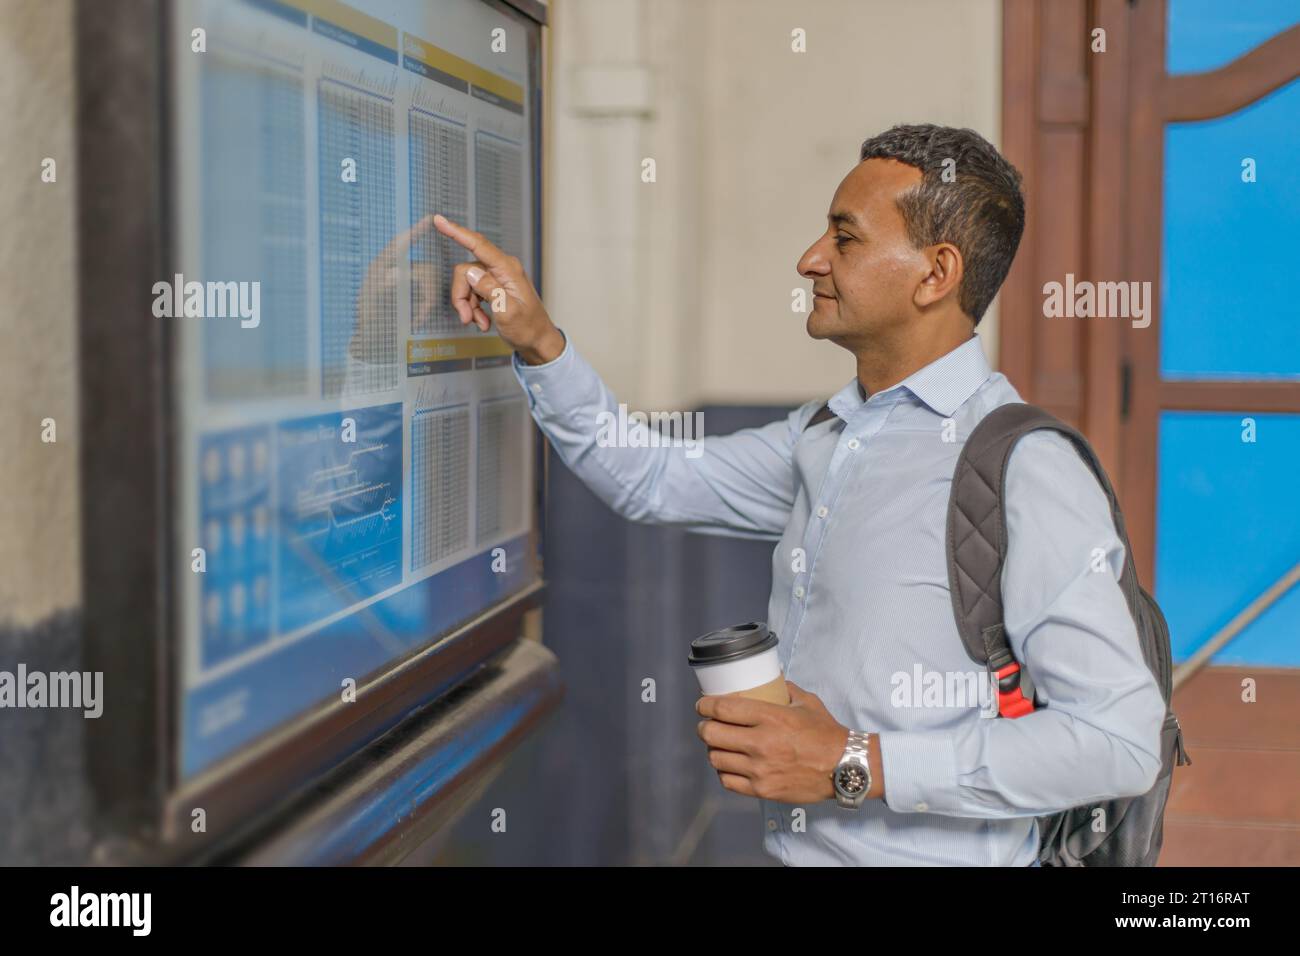 Latin man looking at billboard with train schedules. Stock Photo